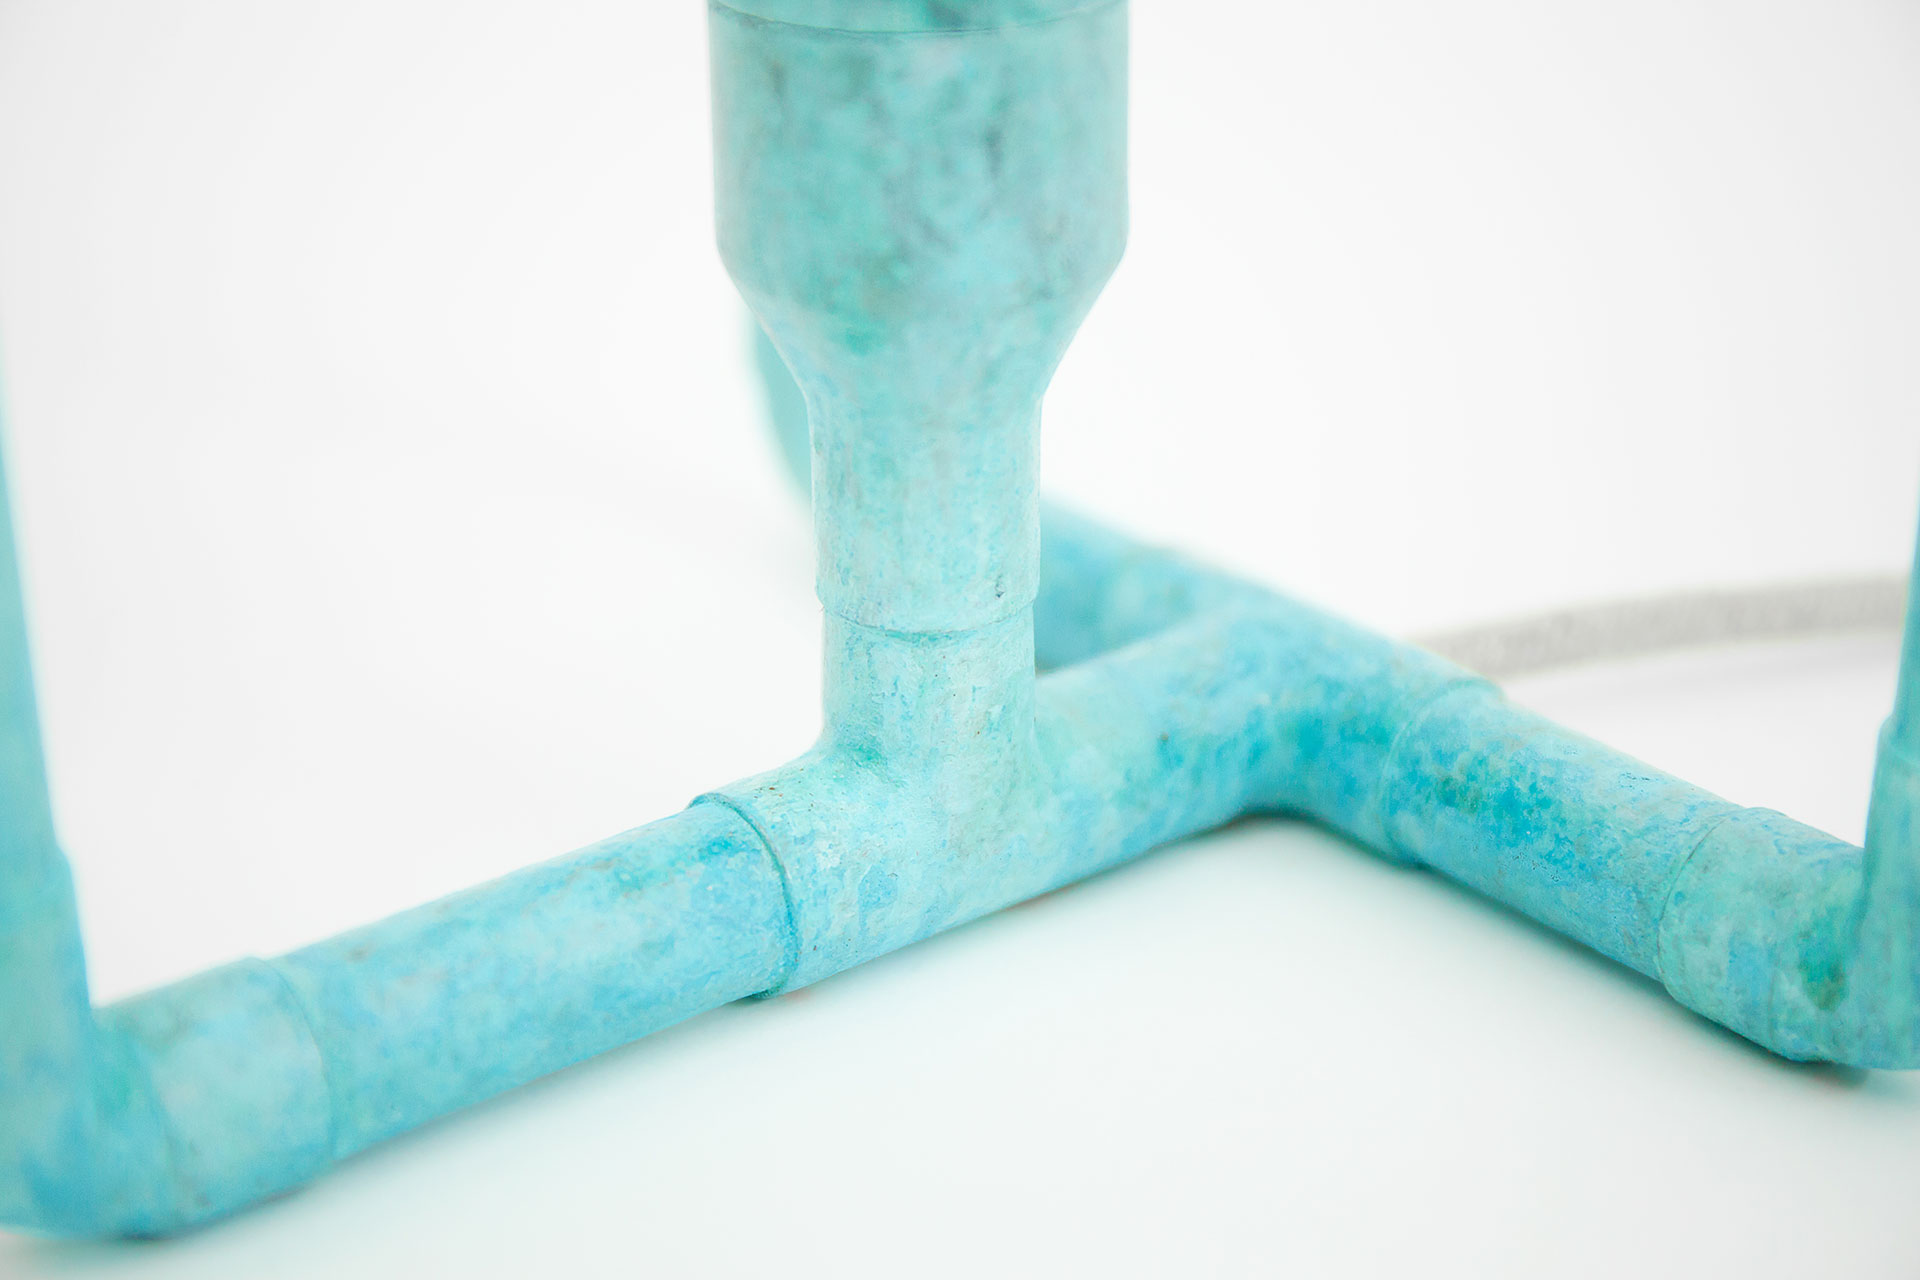 Detail of the colorful table lamp in natural turquoise patina